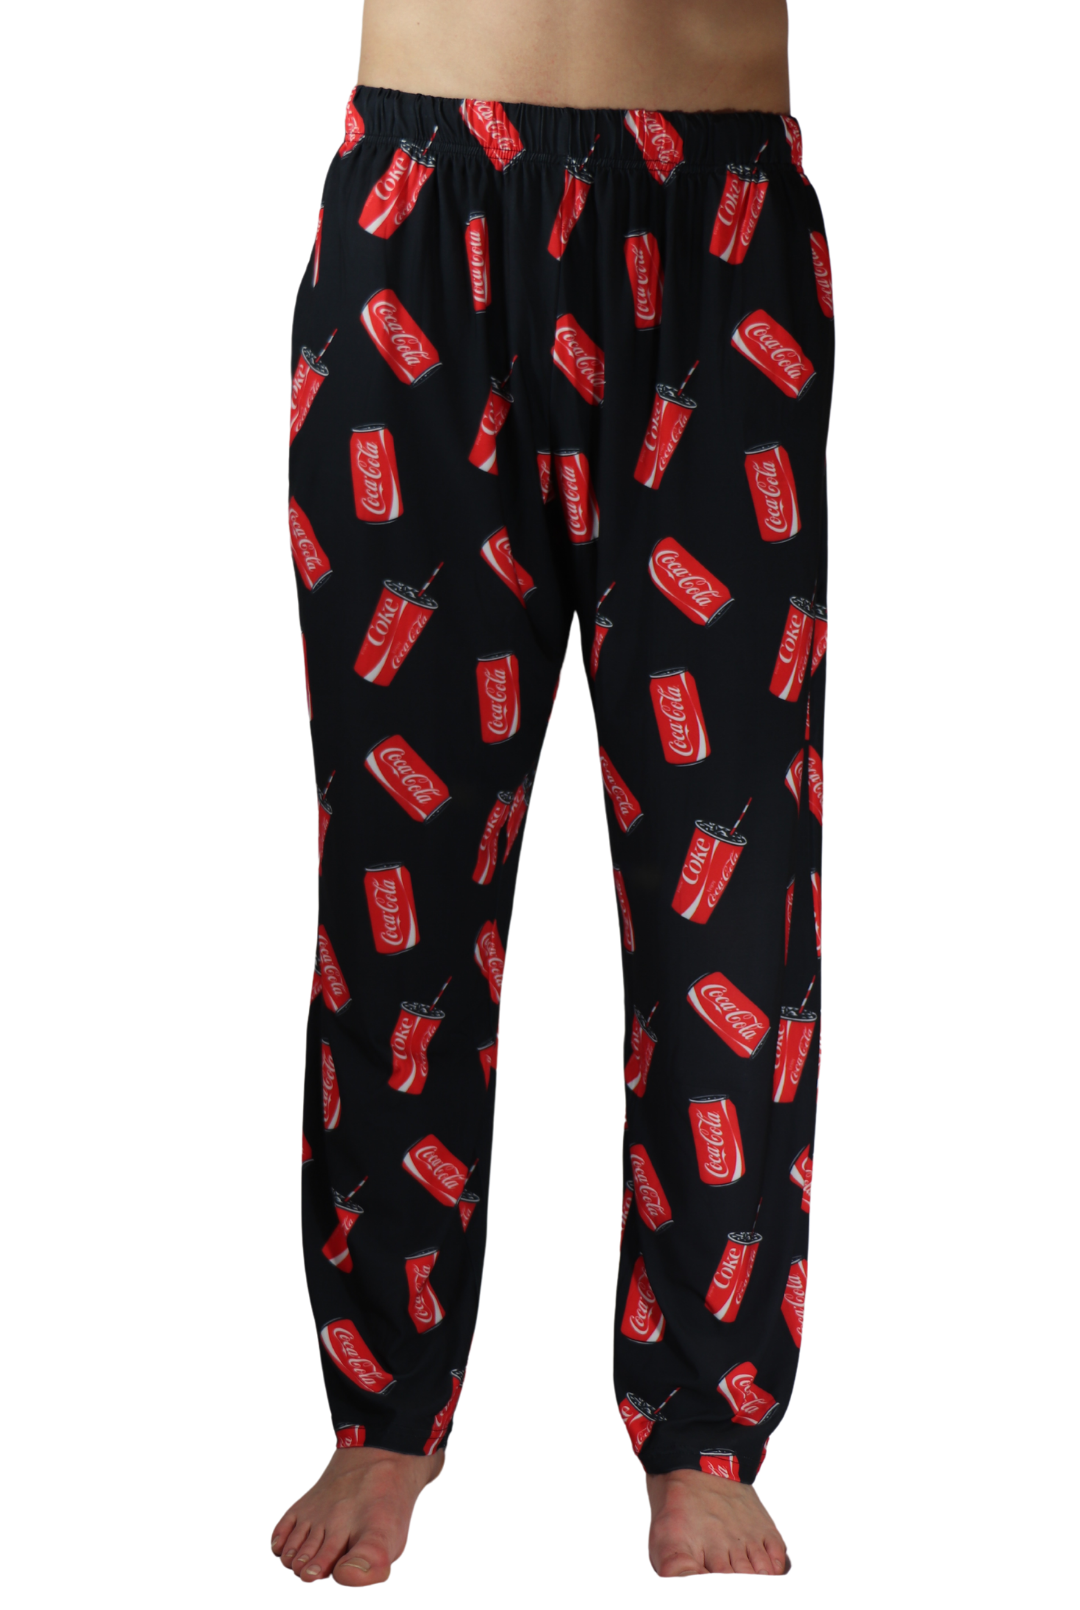 Coca-Cola Can & Cup Pattern Pajama Lounge Pants on model full front view